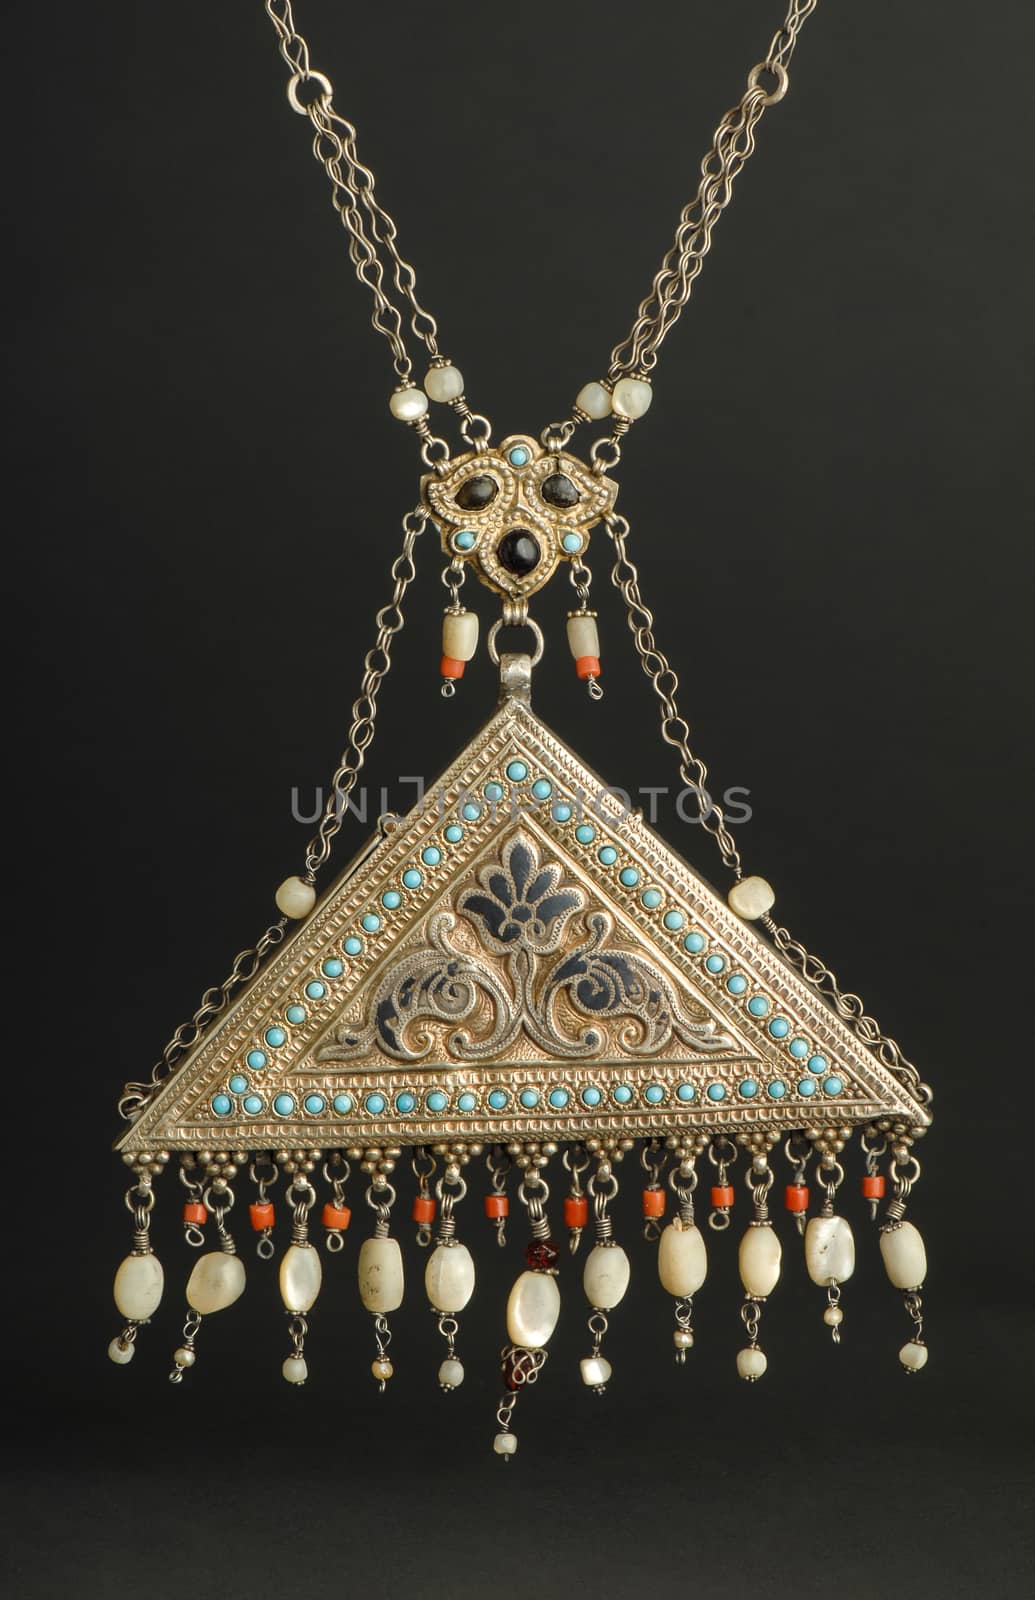 ancient antique pendant with stones on black background. Middle-Asian vintage jewelry